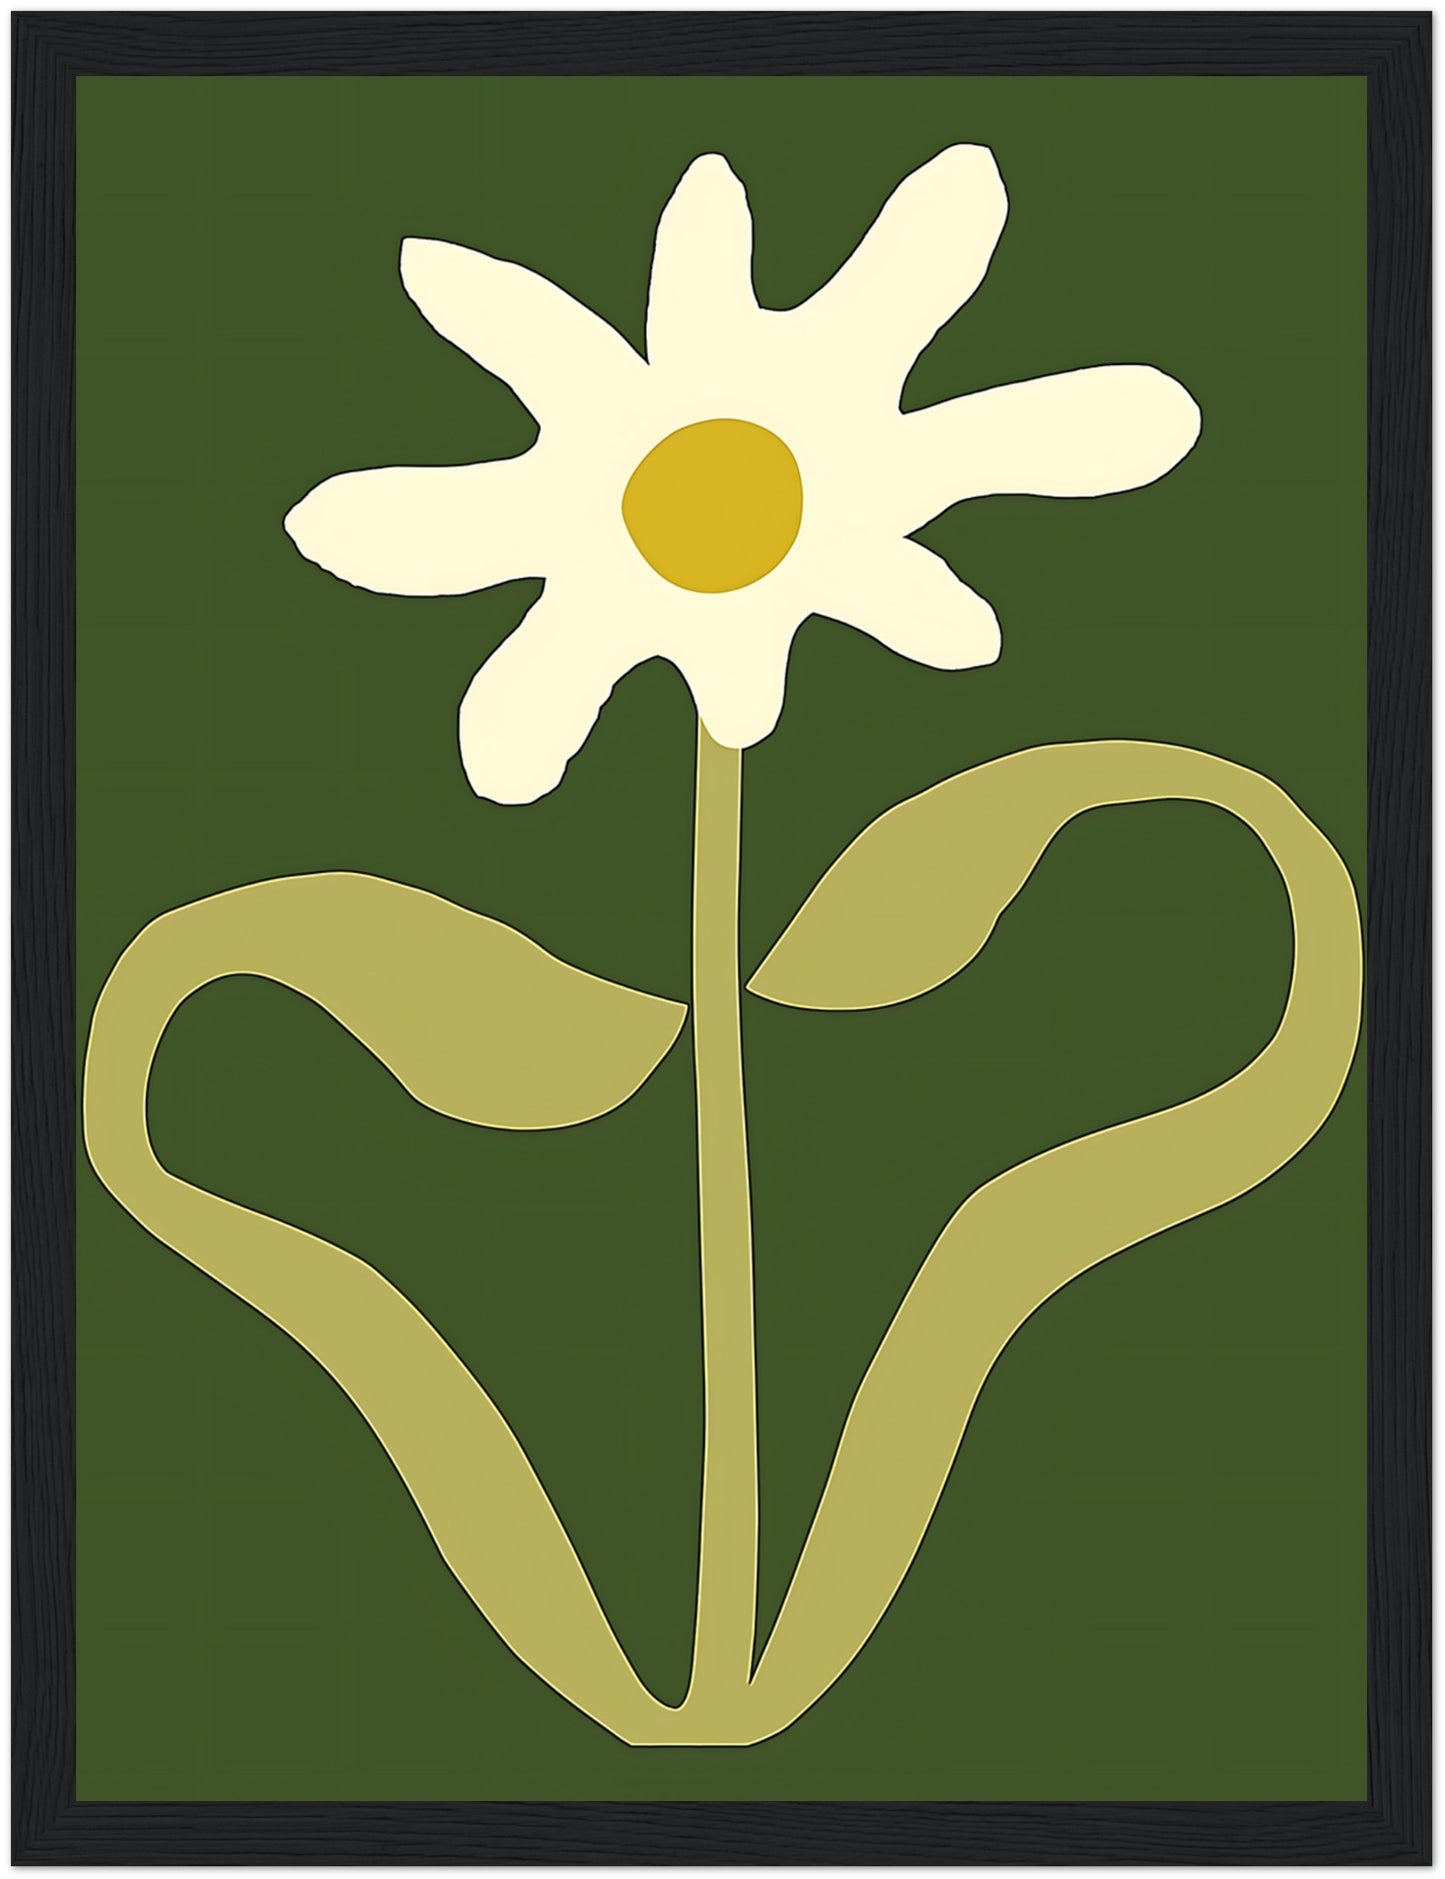 A stylized image of a white flower with a yellow center and green background, framed in brown.